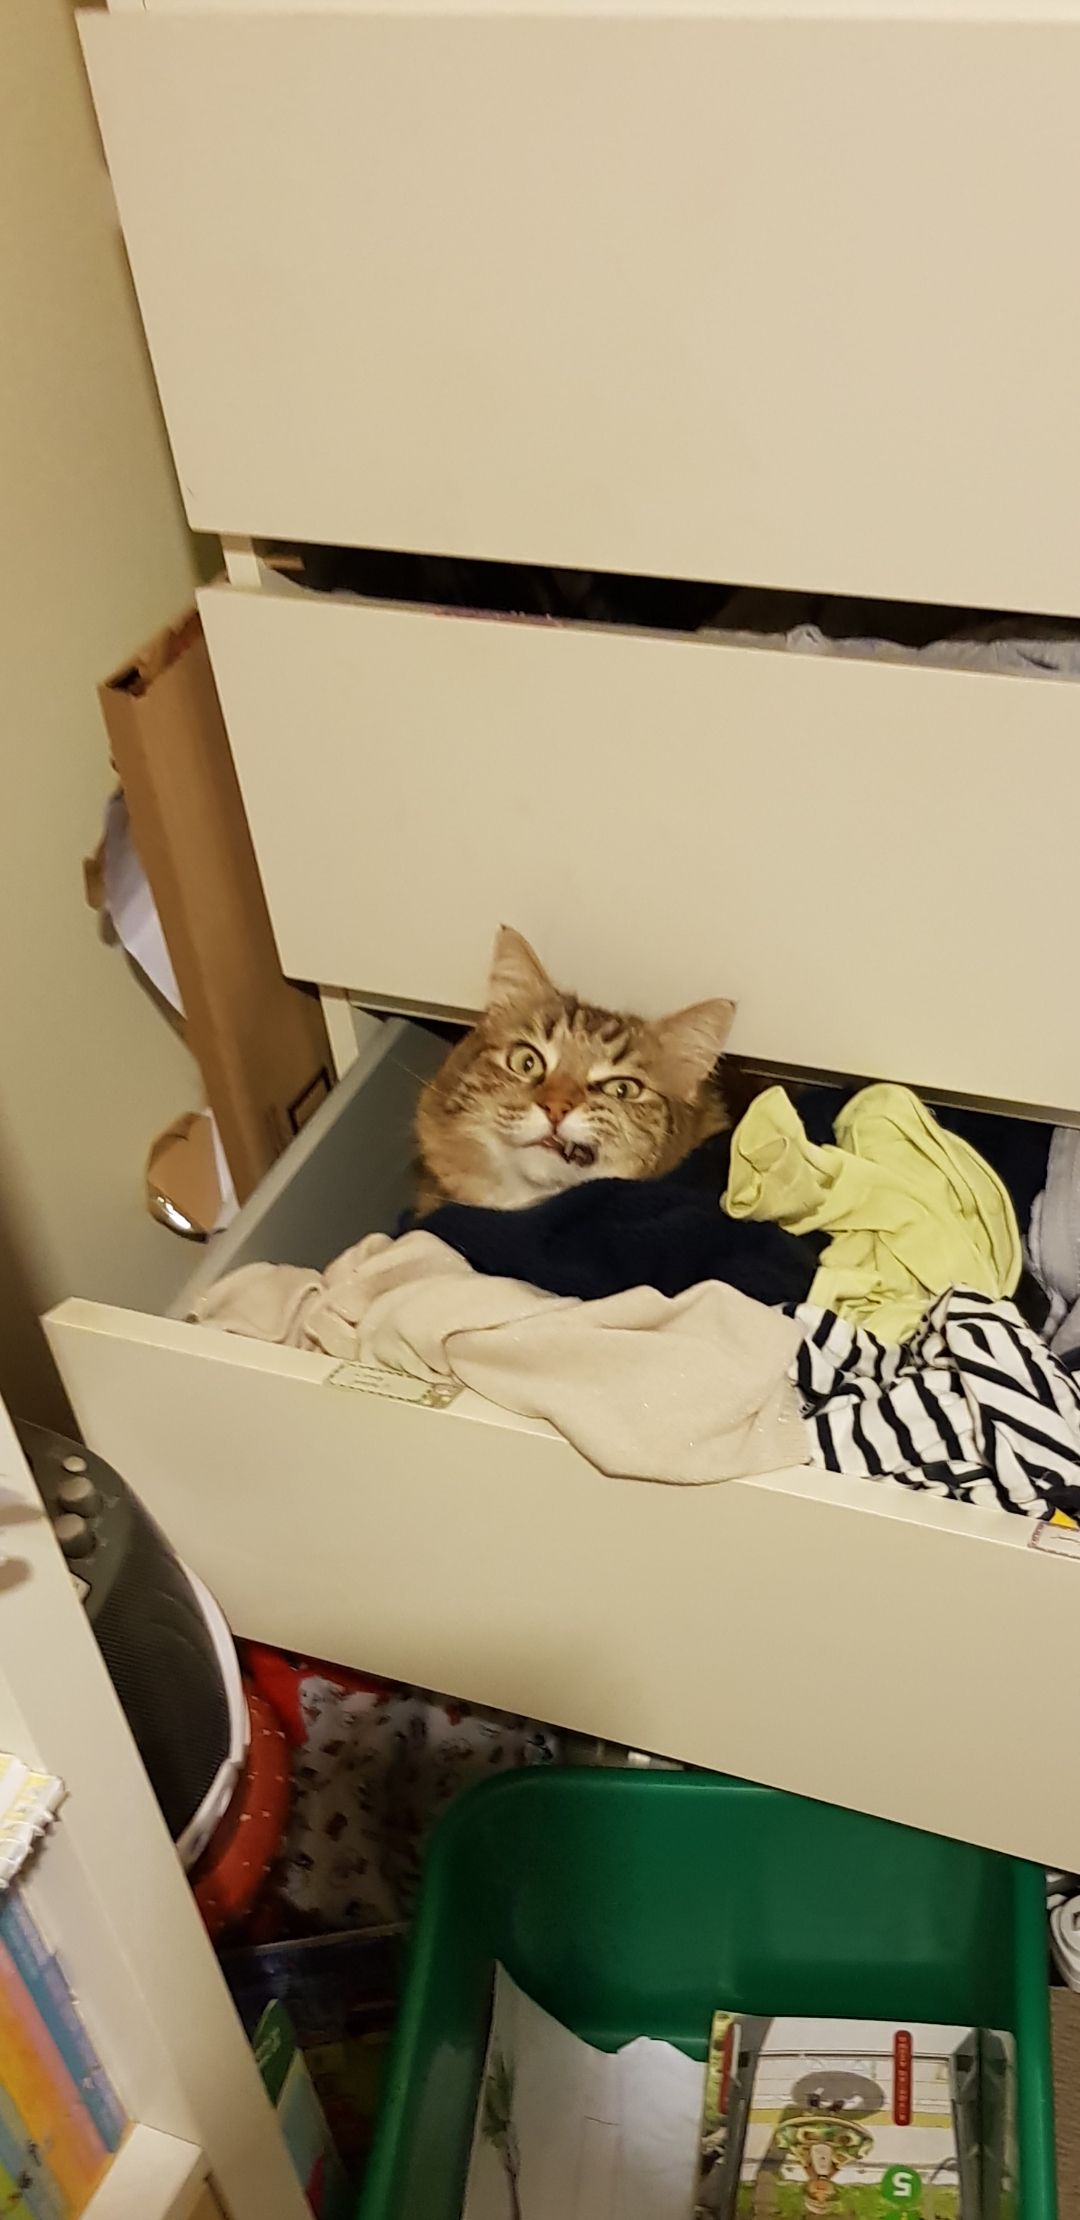 Angry drunk pirate cat hiding in my daughter's drawer